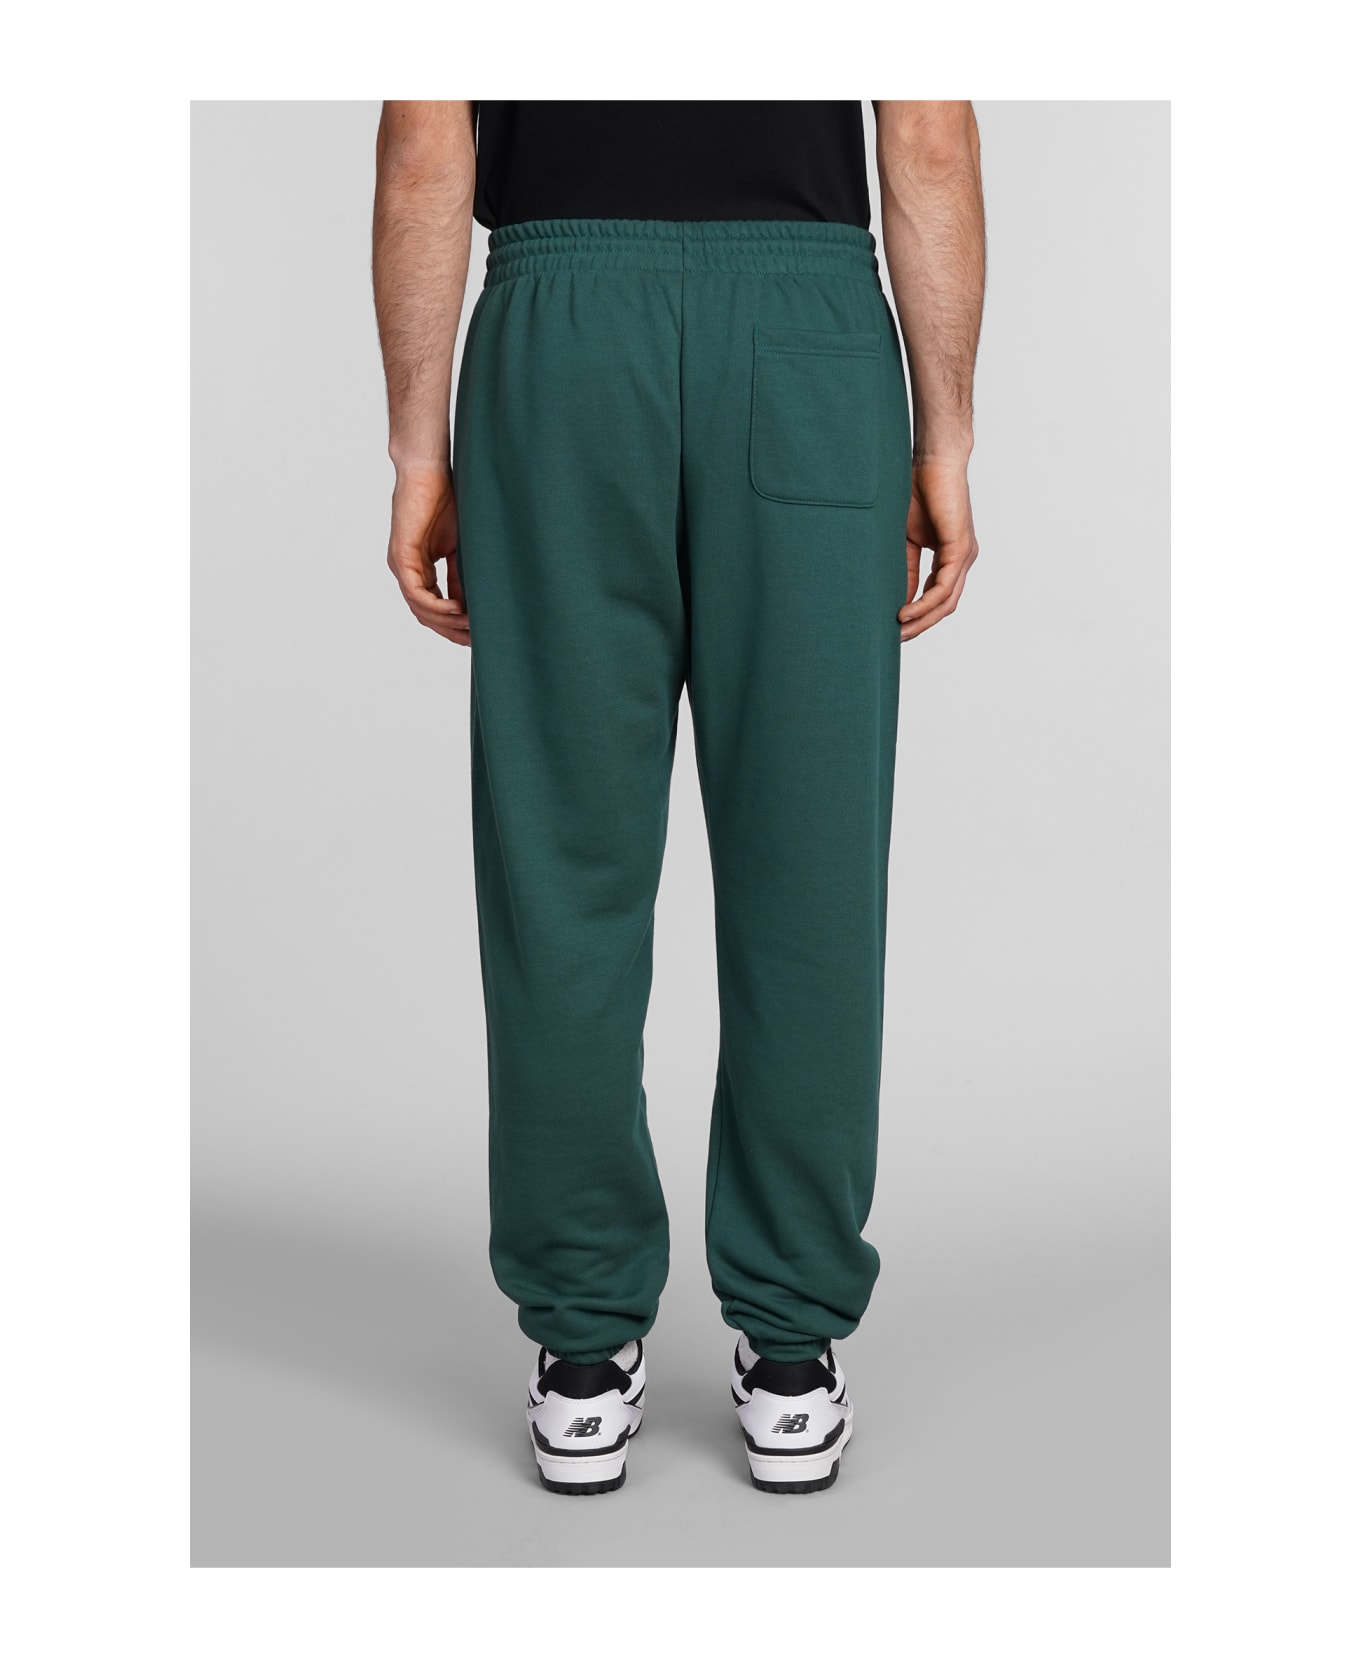 New Balance Pants In Green Cotton - green